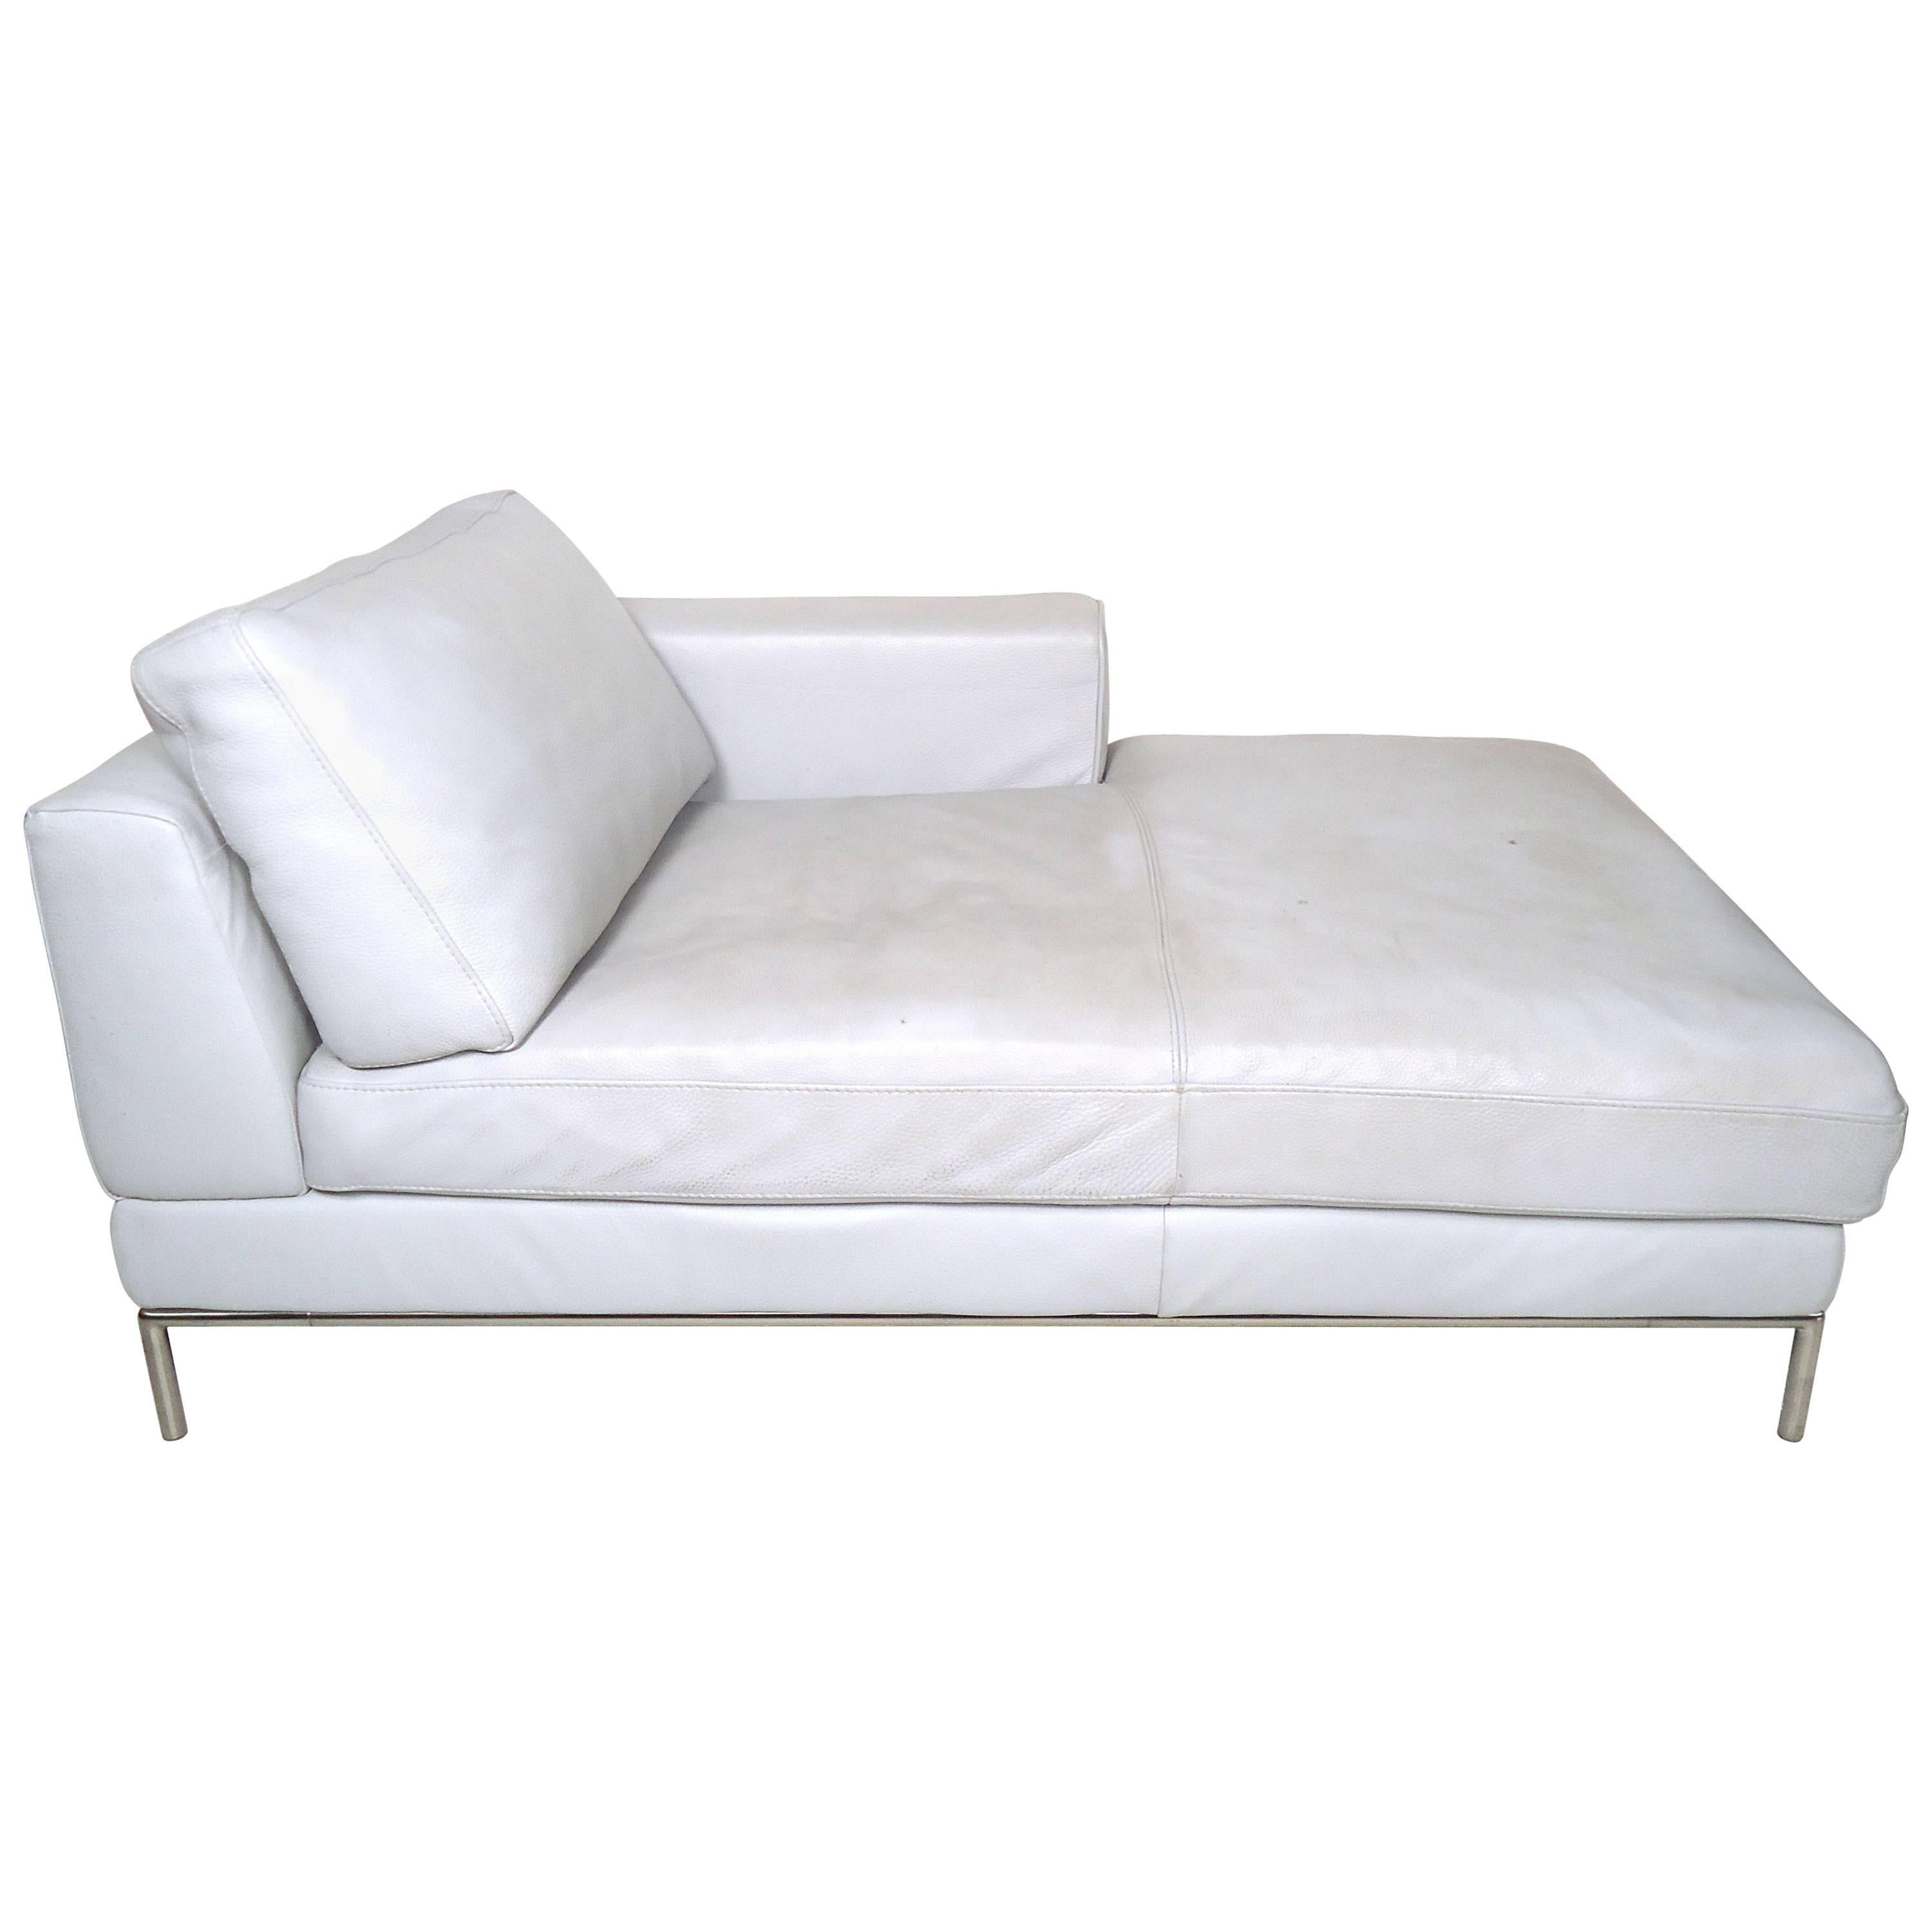 Mid-Century Modern white leather settee supported by a tubular chrome frame. Comfortable and stylish design ideal for both home or office environments. 
Please confirm item location (NY or NJ) with dealer.
 